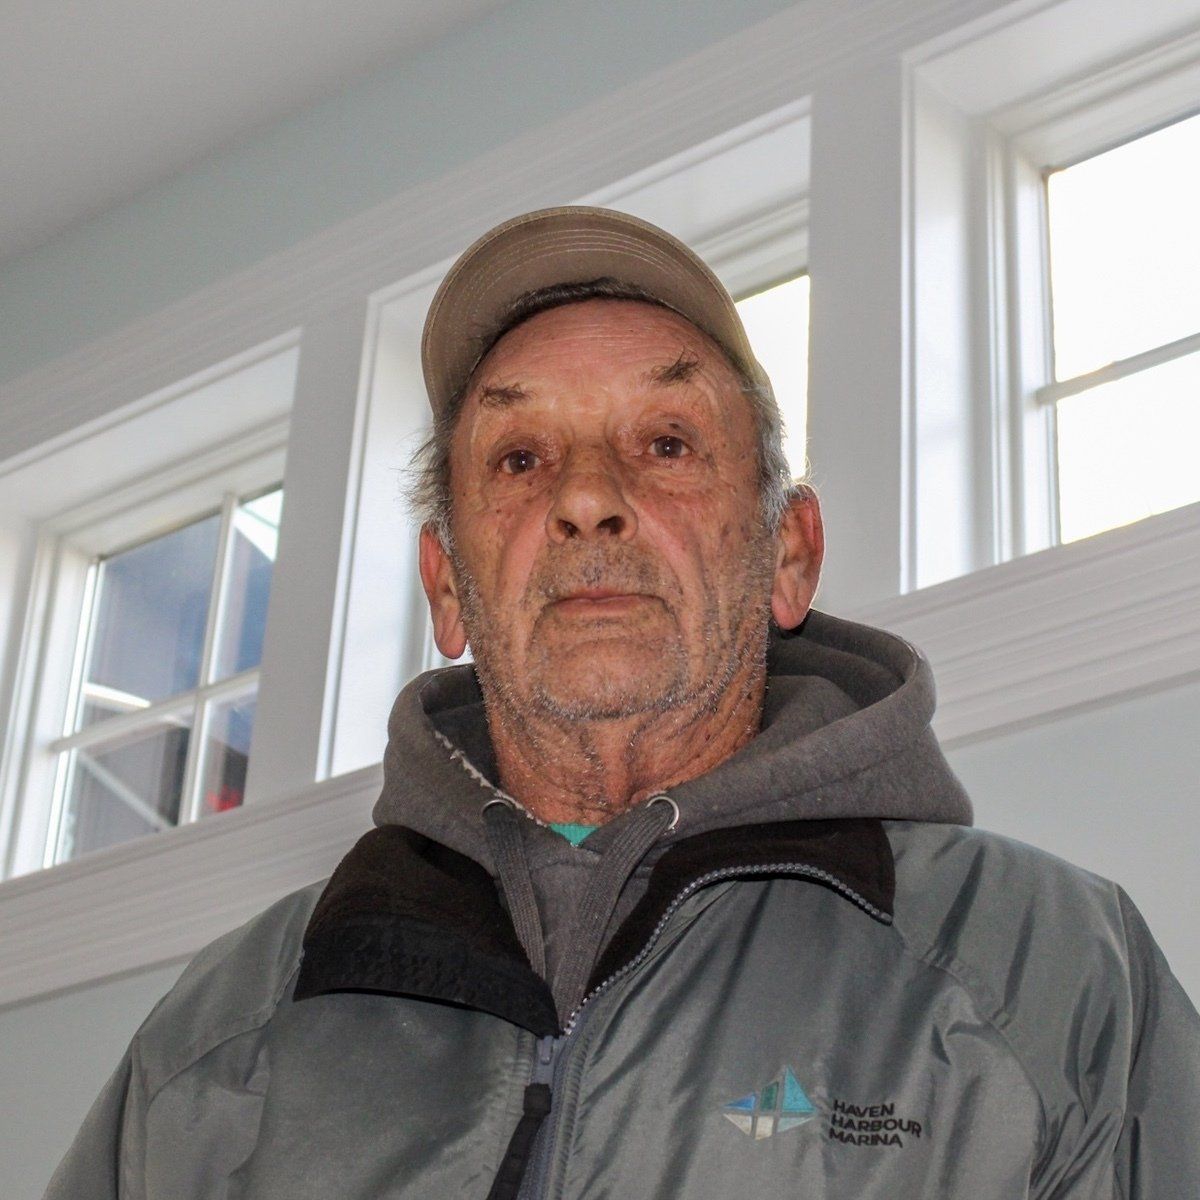 Older male employee pictured indoors in front of window wearing a jacket